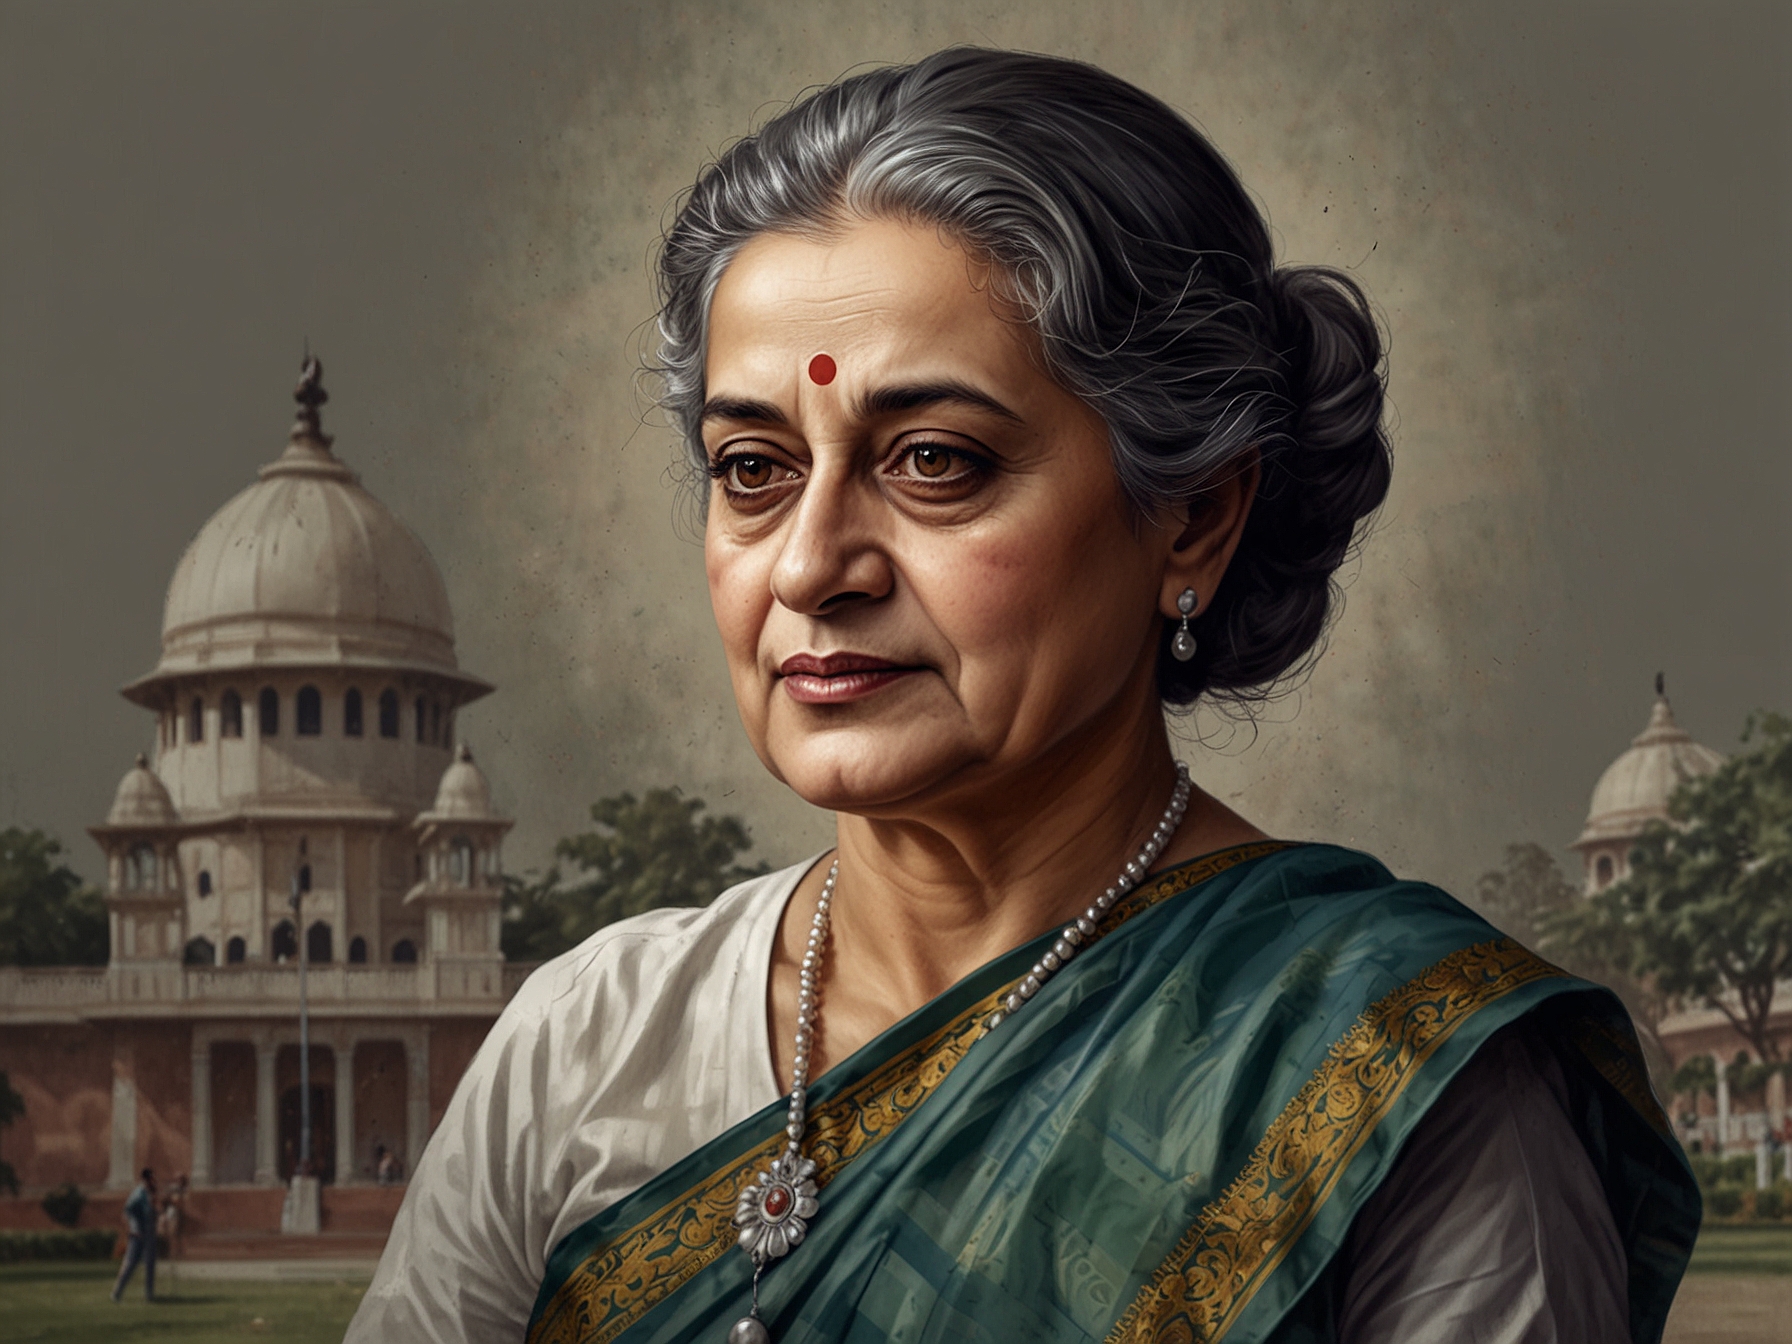 A historical image of former Prime Minister Indira Gandhi during her tenure, symbolizing her influential role in shaping modern India and highlighted by Suresh Gopi's praise after his statement retraction.